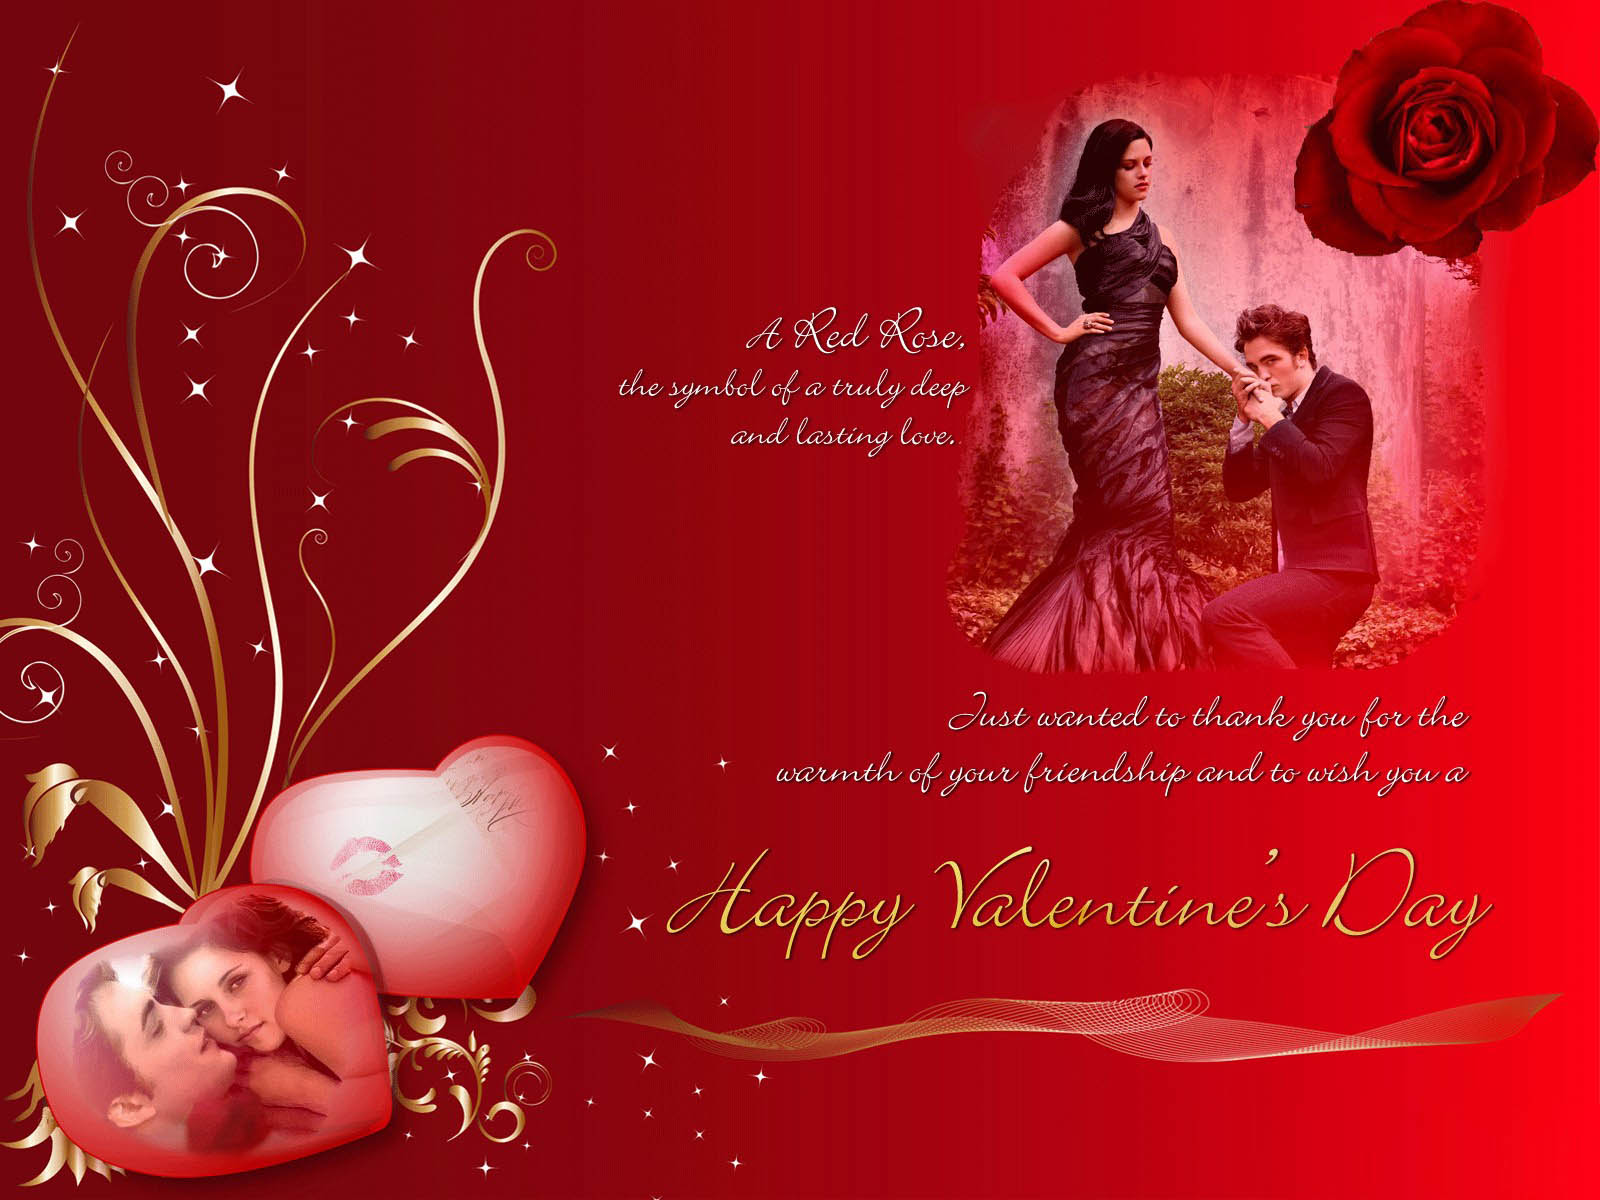 Wallpaper Valentines Day Greetings